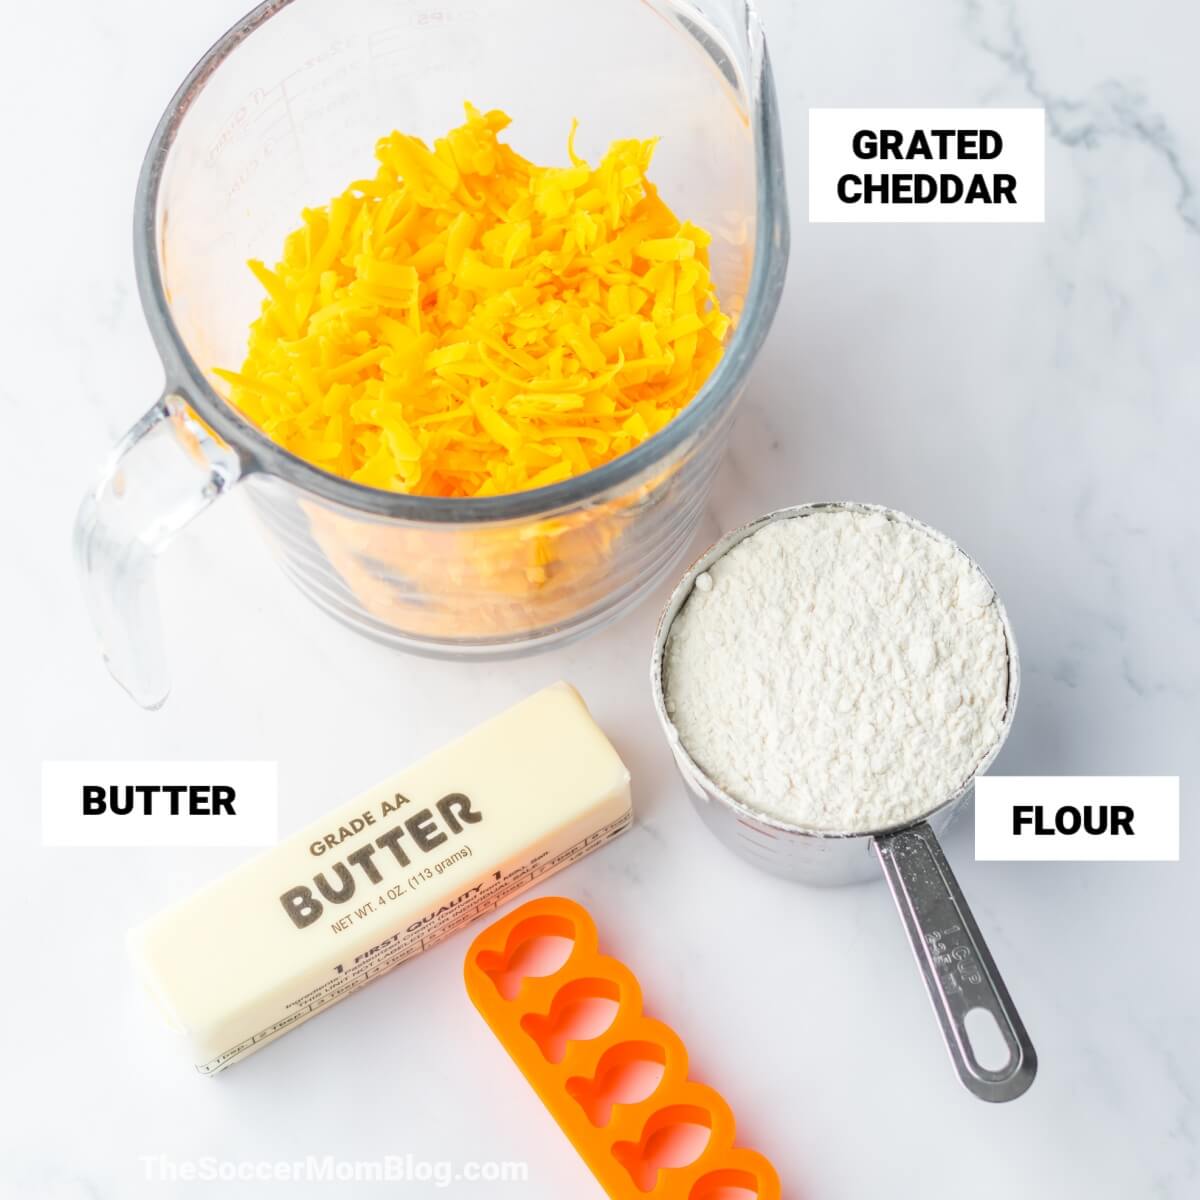 Homemade Goldfish Crackers Ingredients, with text labels: grated cheddar, flour, butter.